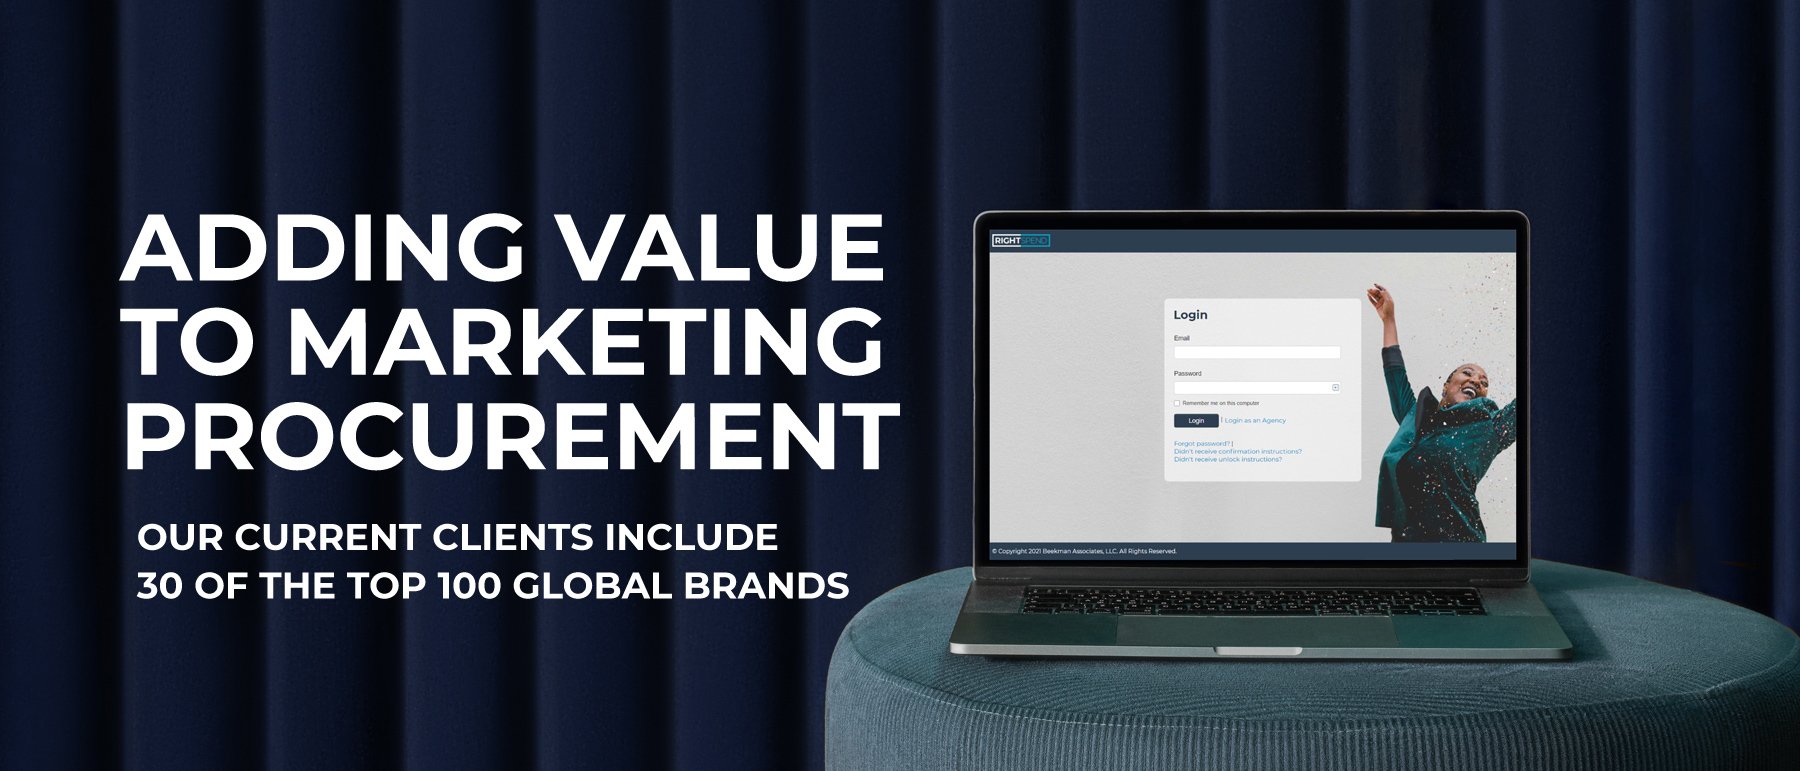 Rightspend - Adding value to marketing procurement. Our current clients include 30 of the top 100 global brands